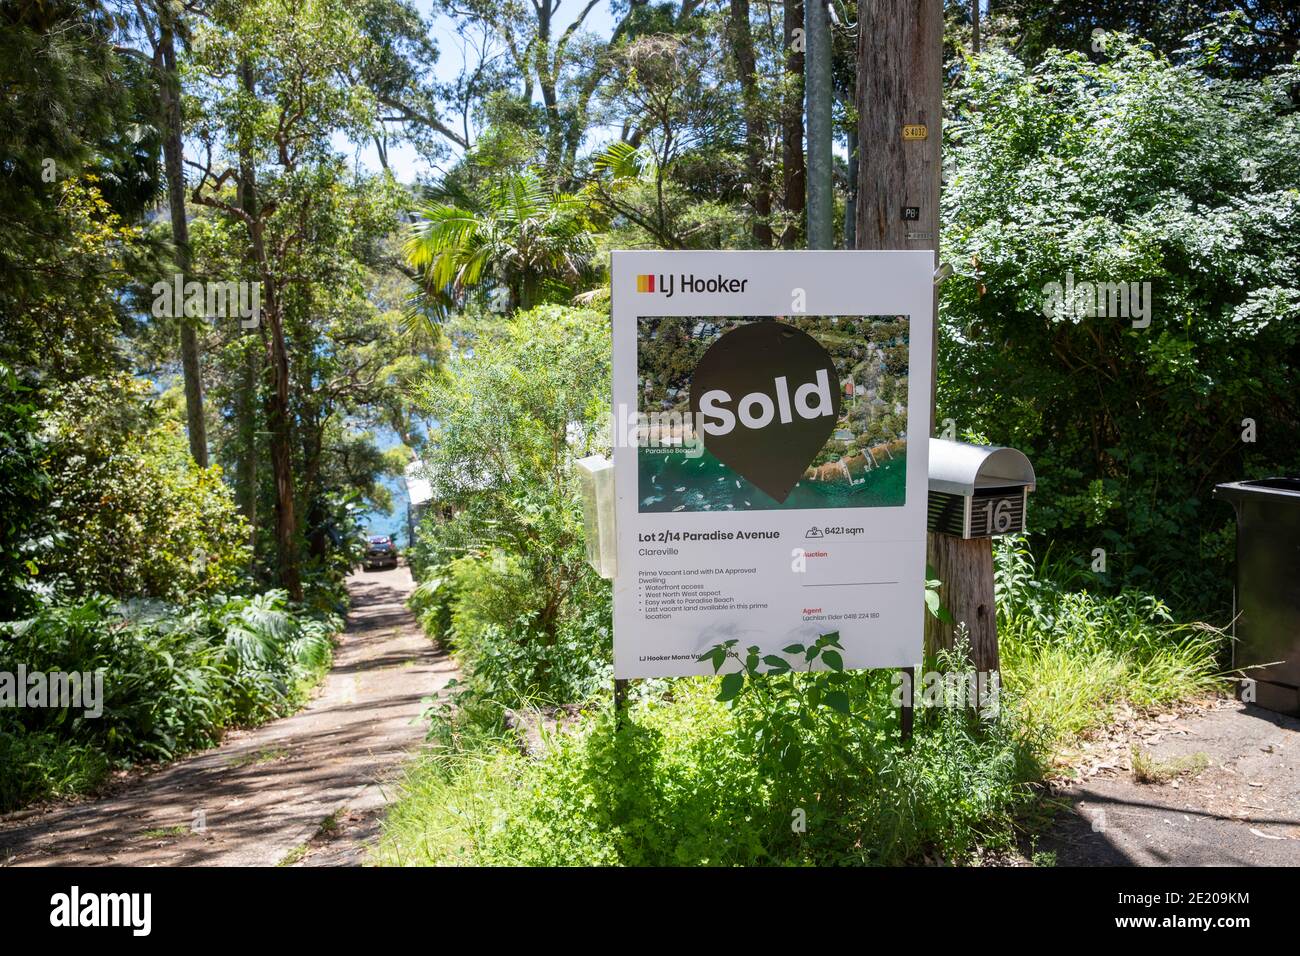 Sydney waterfront home in Avalon Beach sold by L J Hooker real estate agent,NSW,Australia Stock Photo